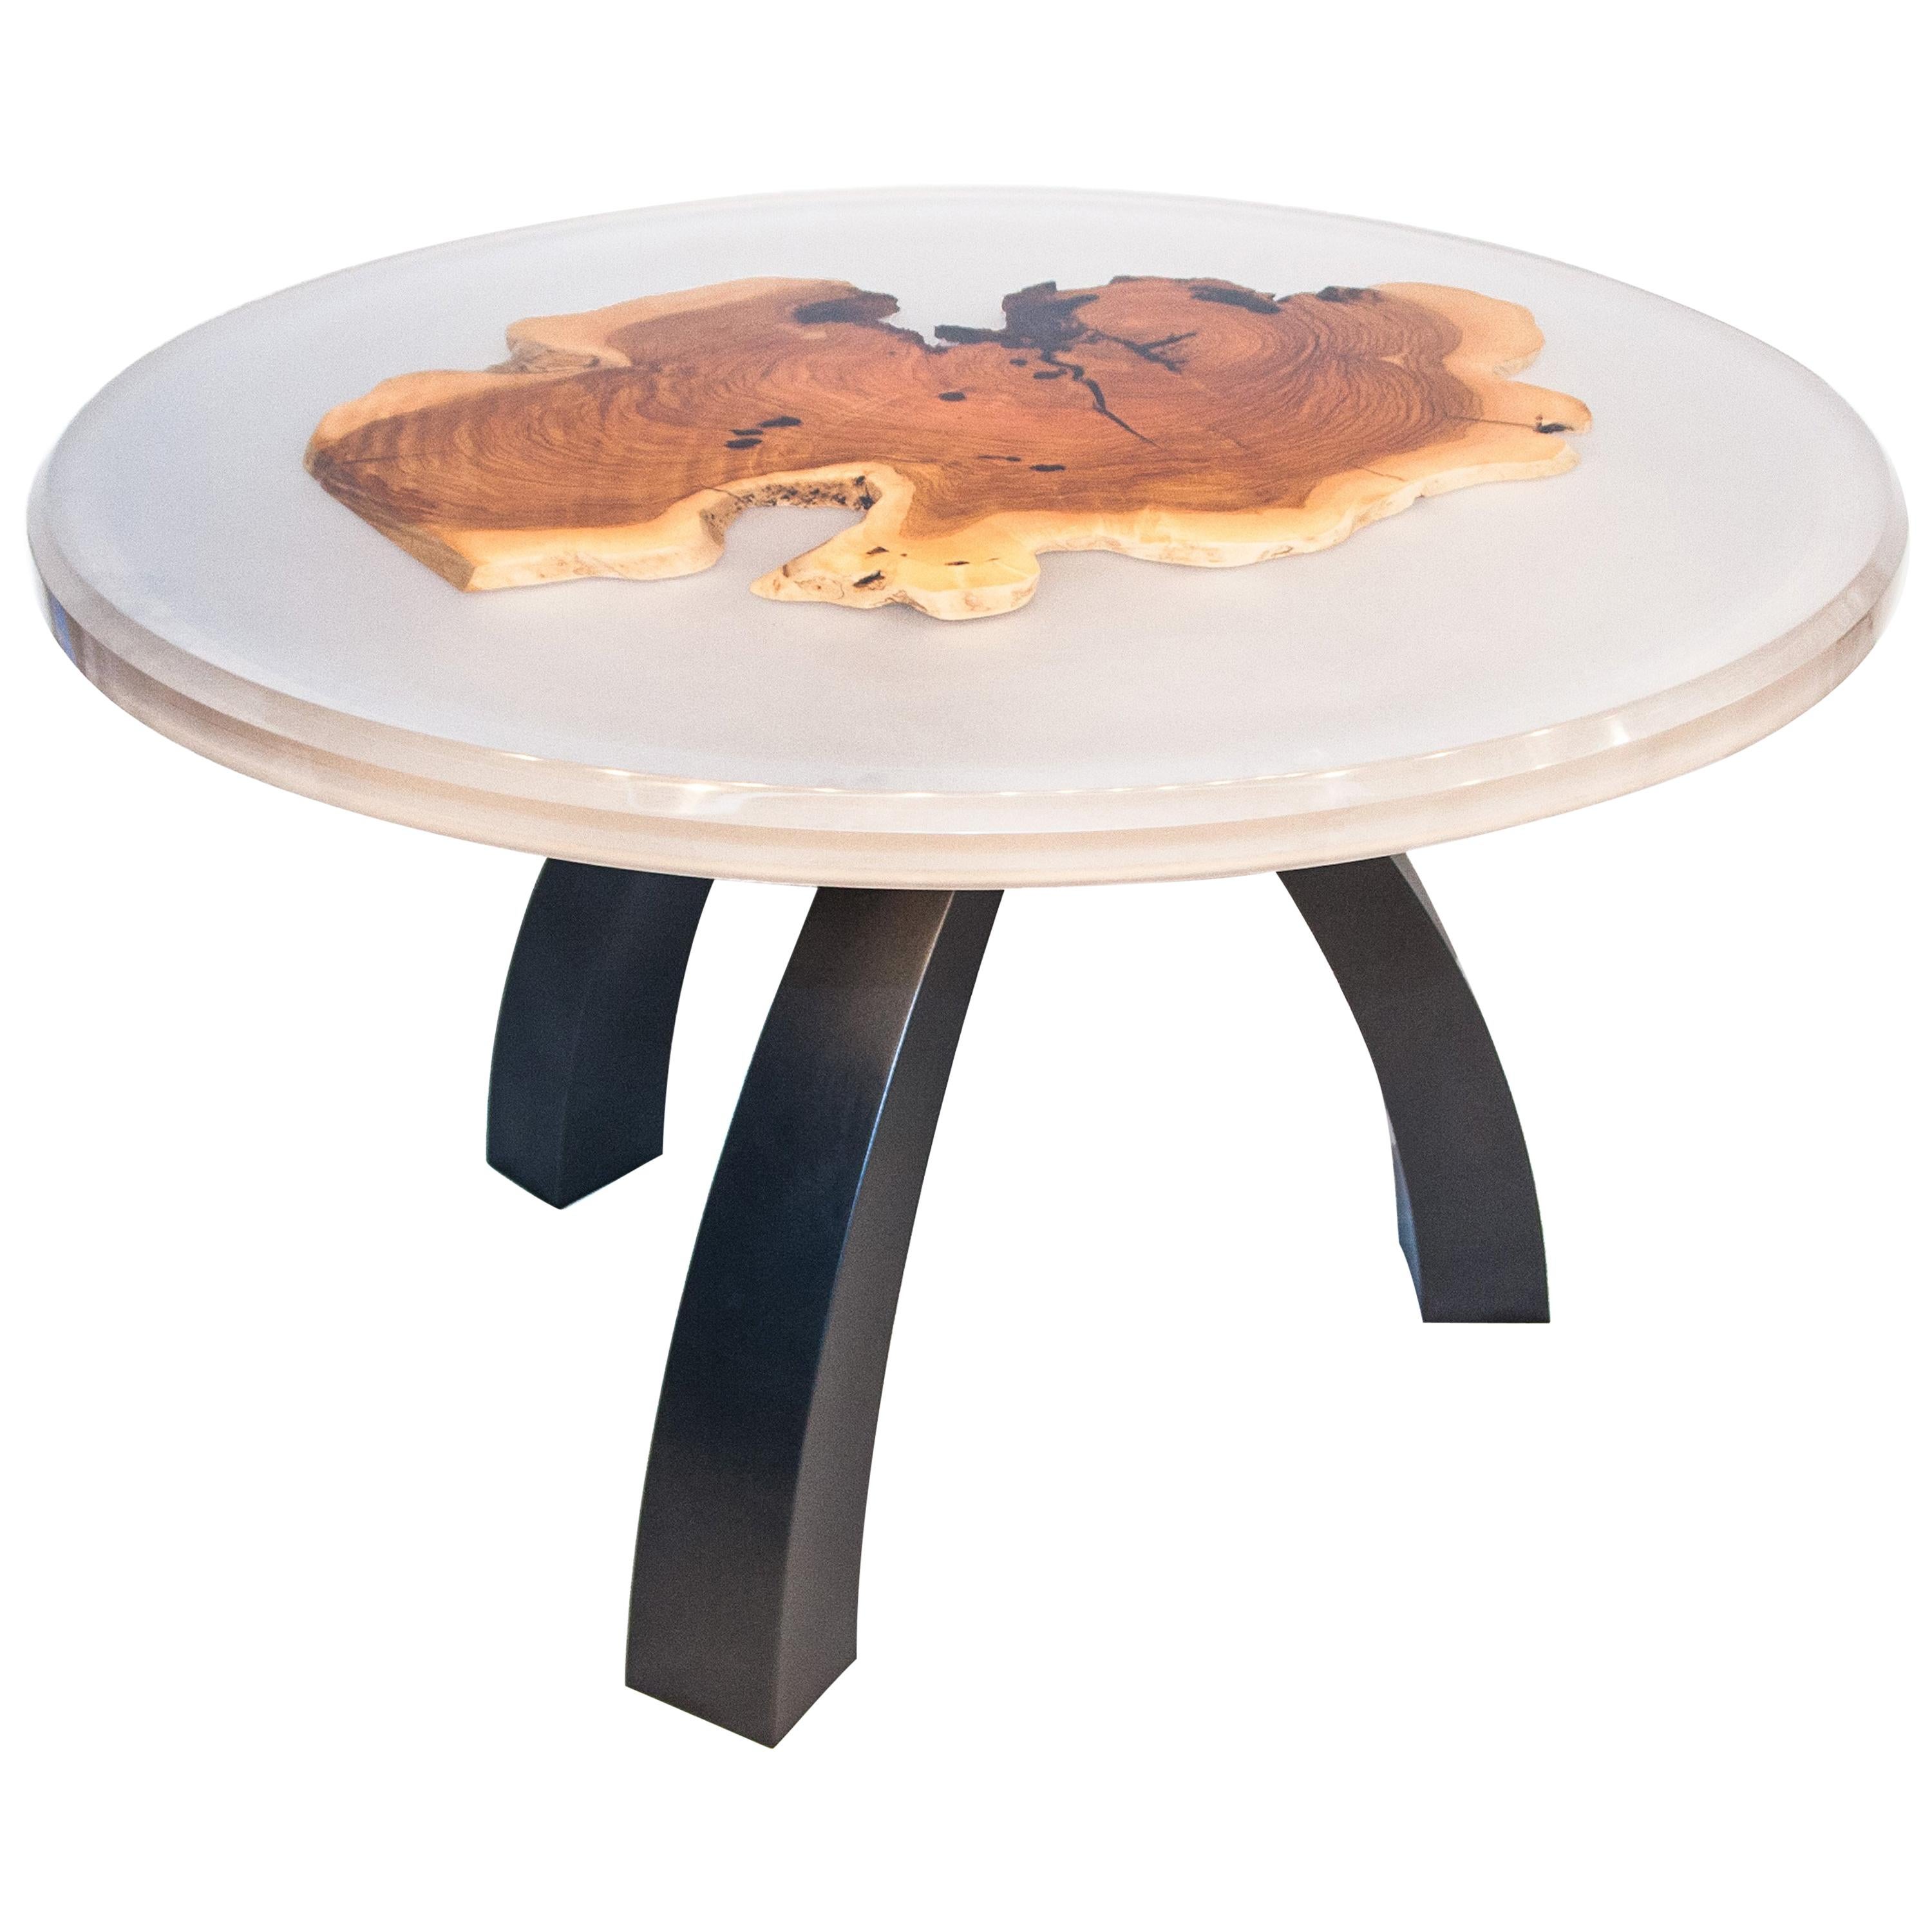 Contemporary Epoxy Resin round Dining Table with a Slice of Olive Tree Trunk For Sale